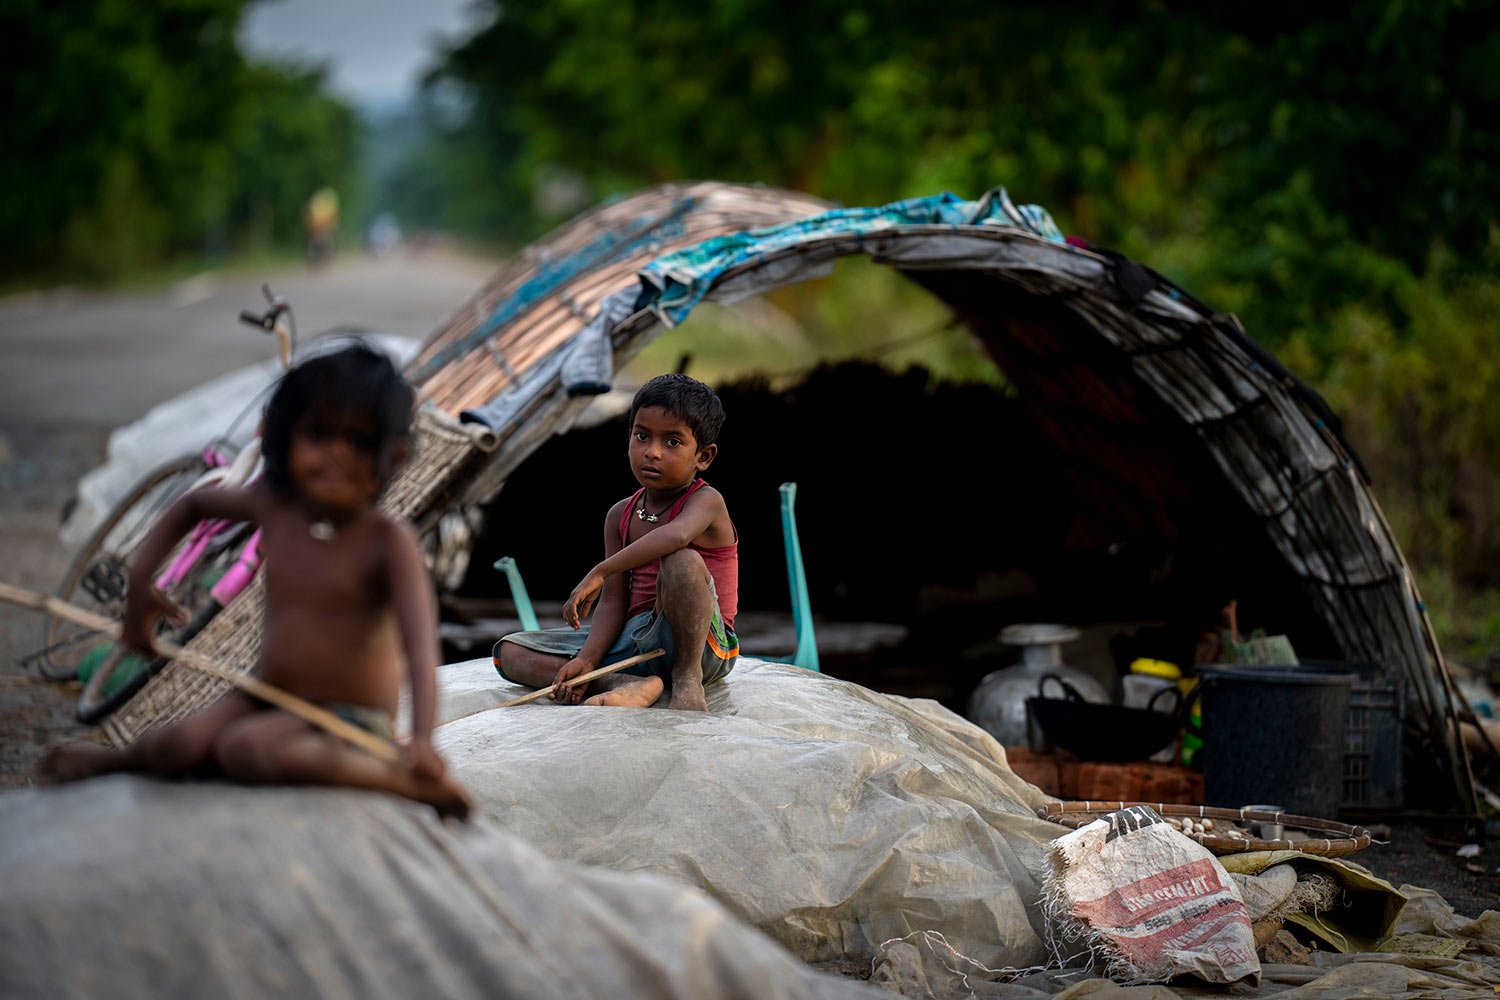  Flood affected children sit near their makeshift shelter on a road in Pobitora in Morigaon district east Gauhati, Assam state, India, Tuesday, June 28, 2022.  (AP Photo/Anupam Nath) 